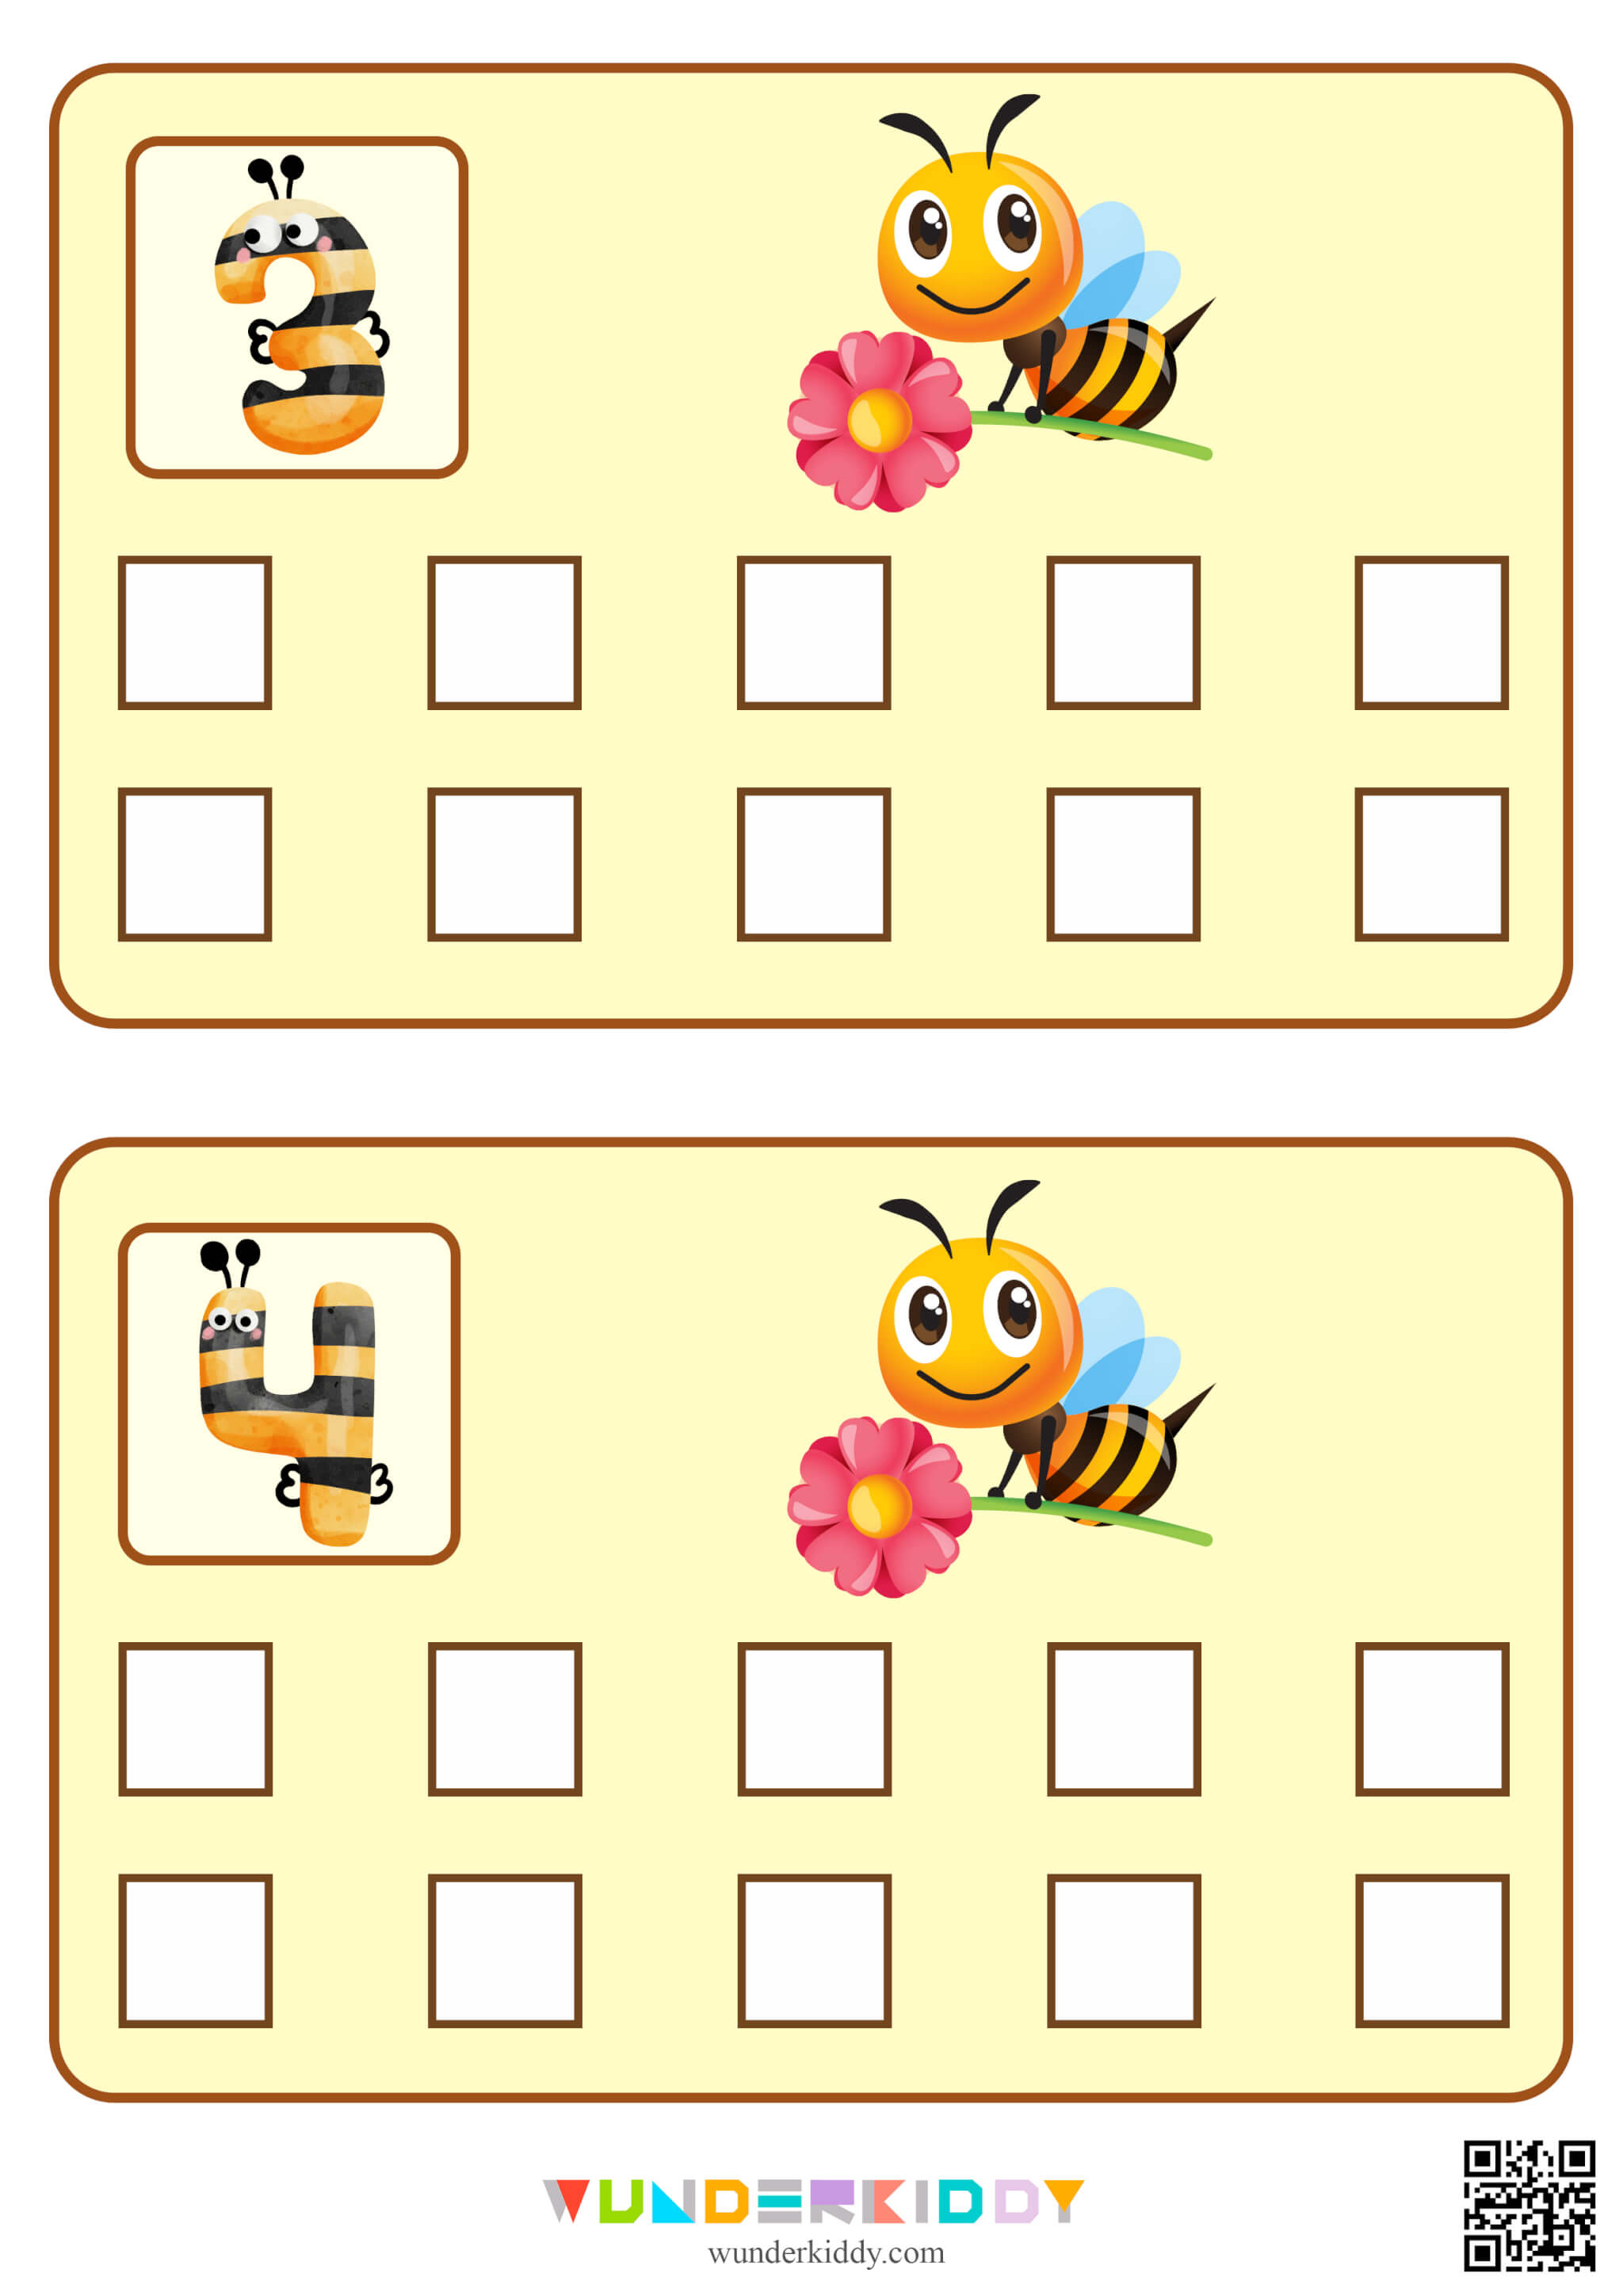 Worksheets «Counting bees» - Image 3